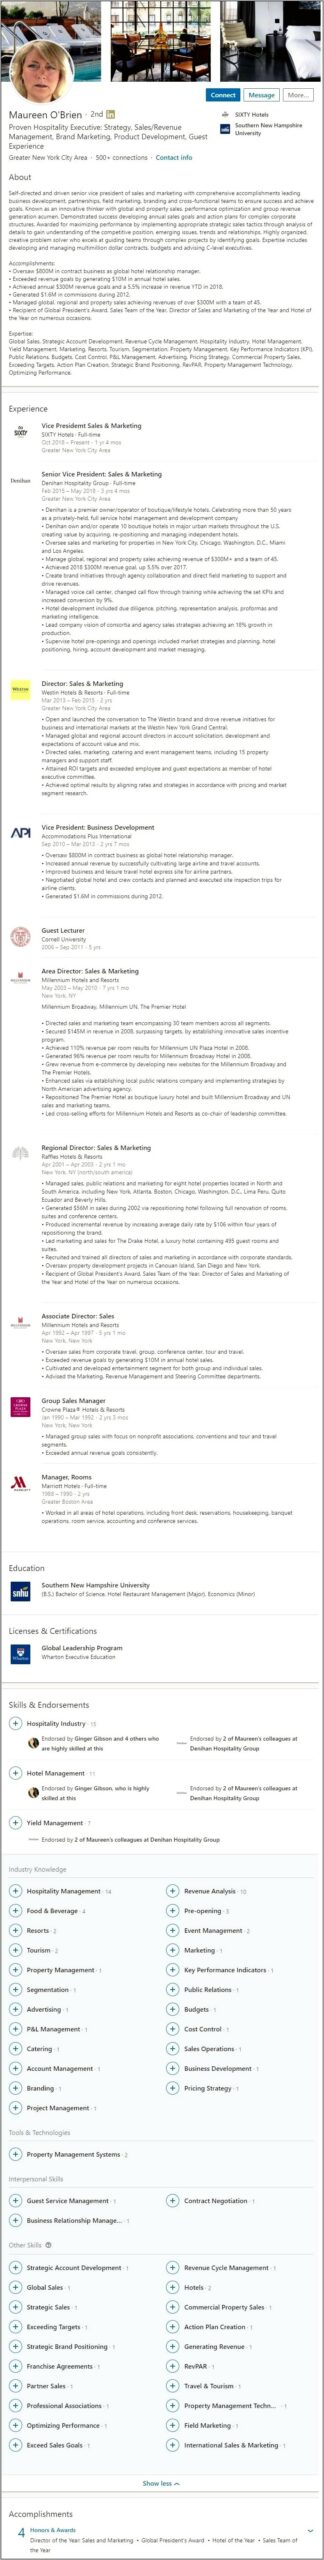 Skills And Abilities For Tourism Resume